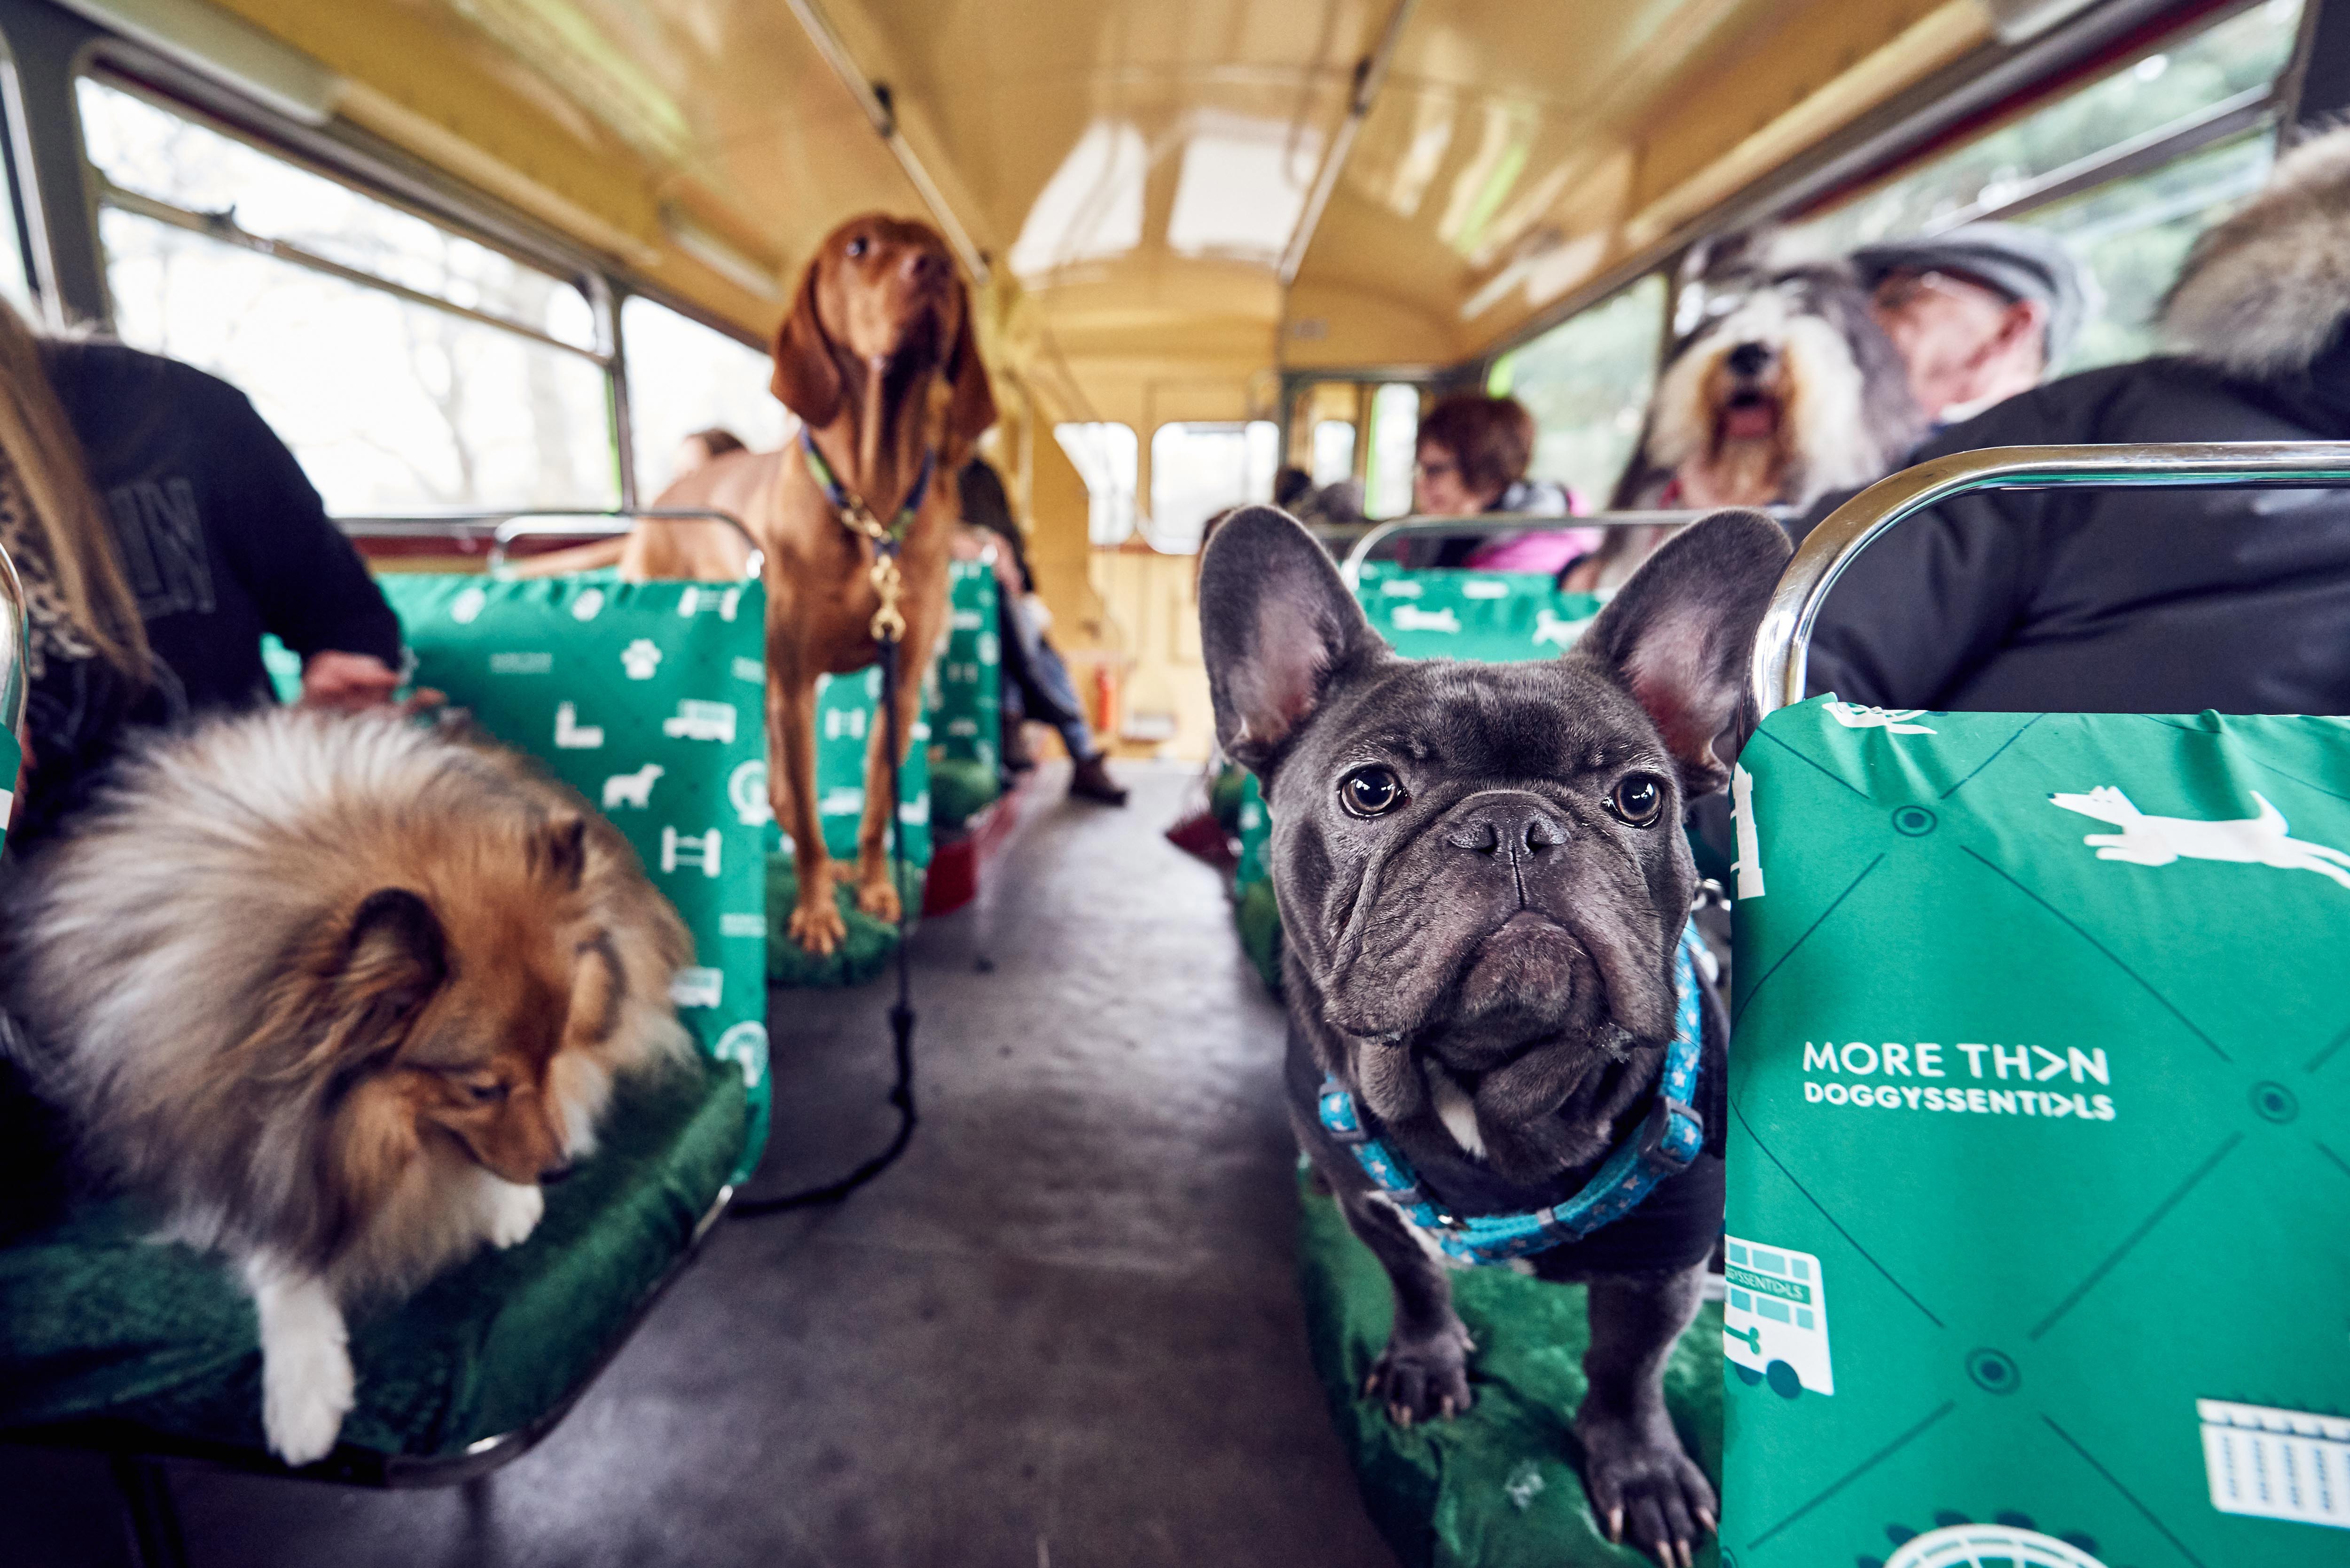 Bus and dog photo